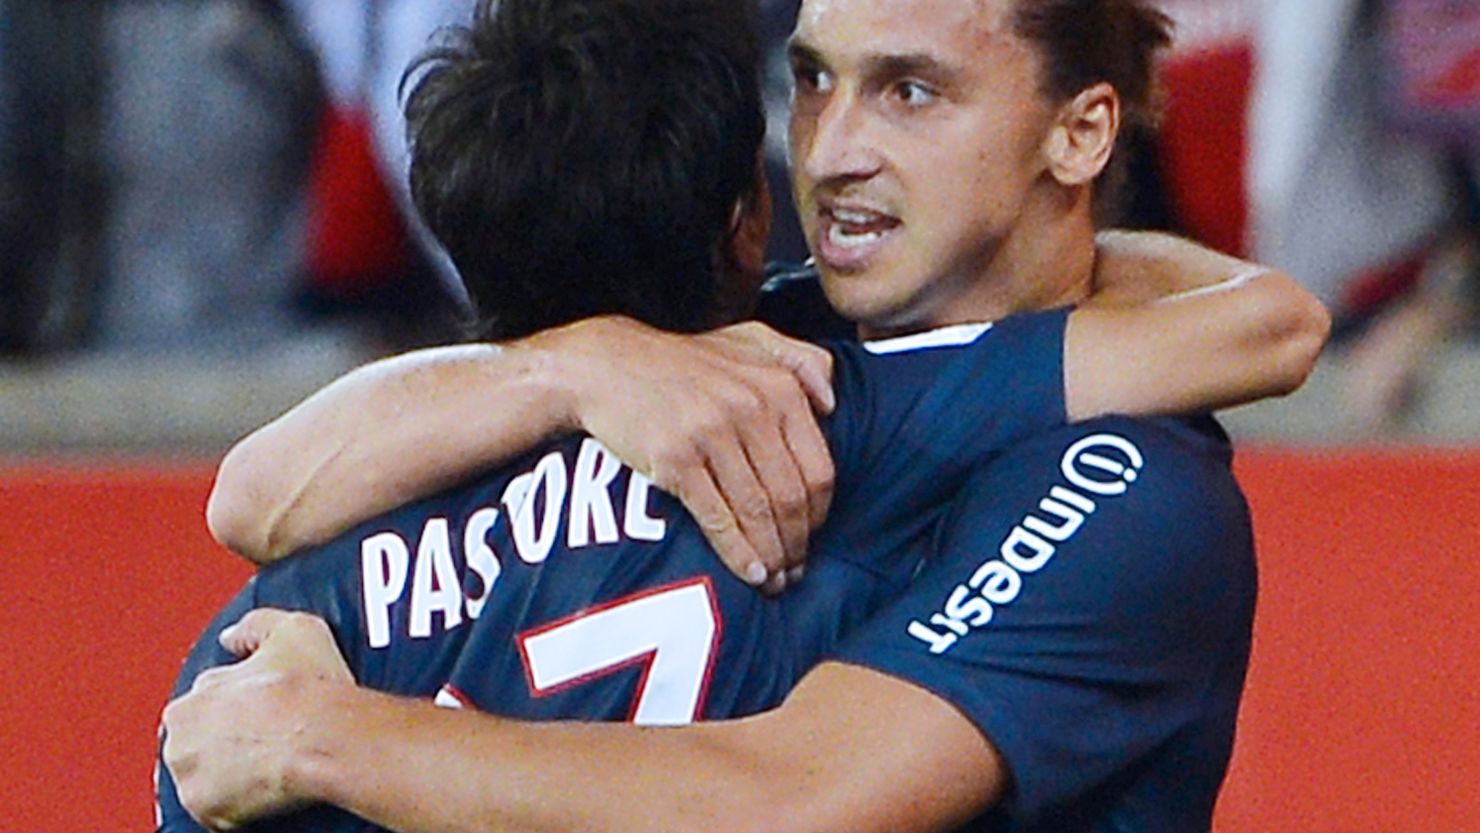 Zlatan Ibrahimovic and teammate Javier Pastore earned Paris Saint Germain a 2-0 win over Toulouse on Friday